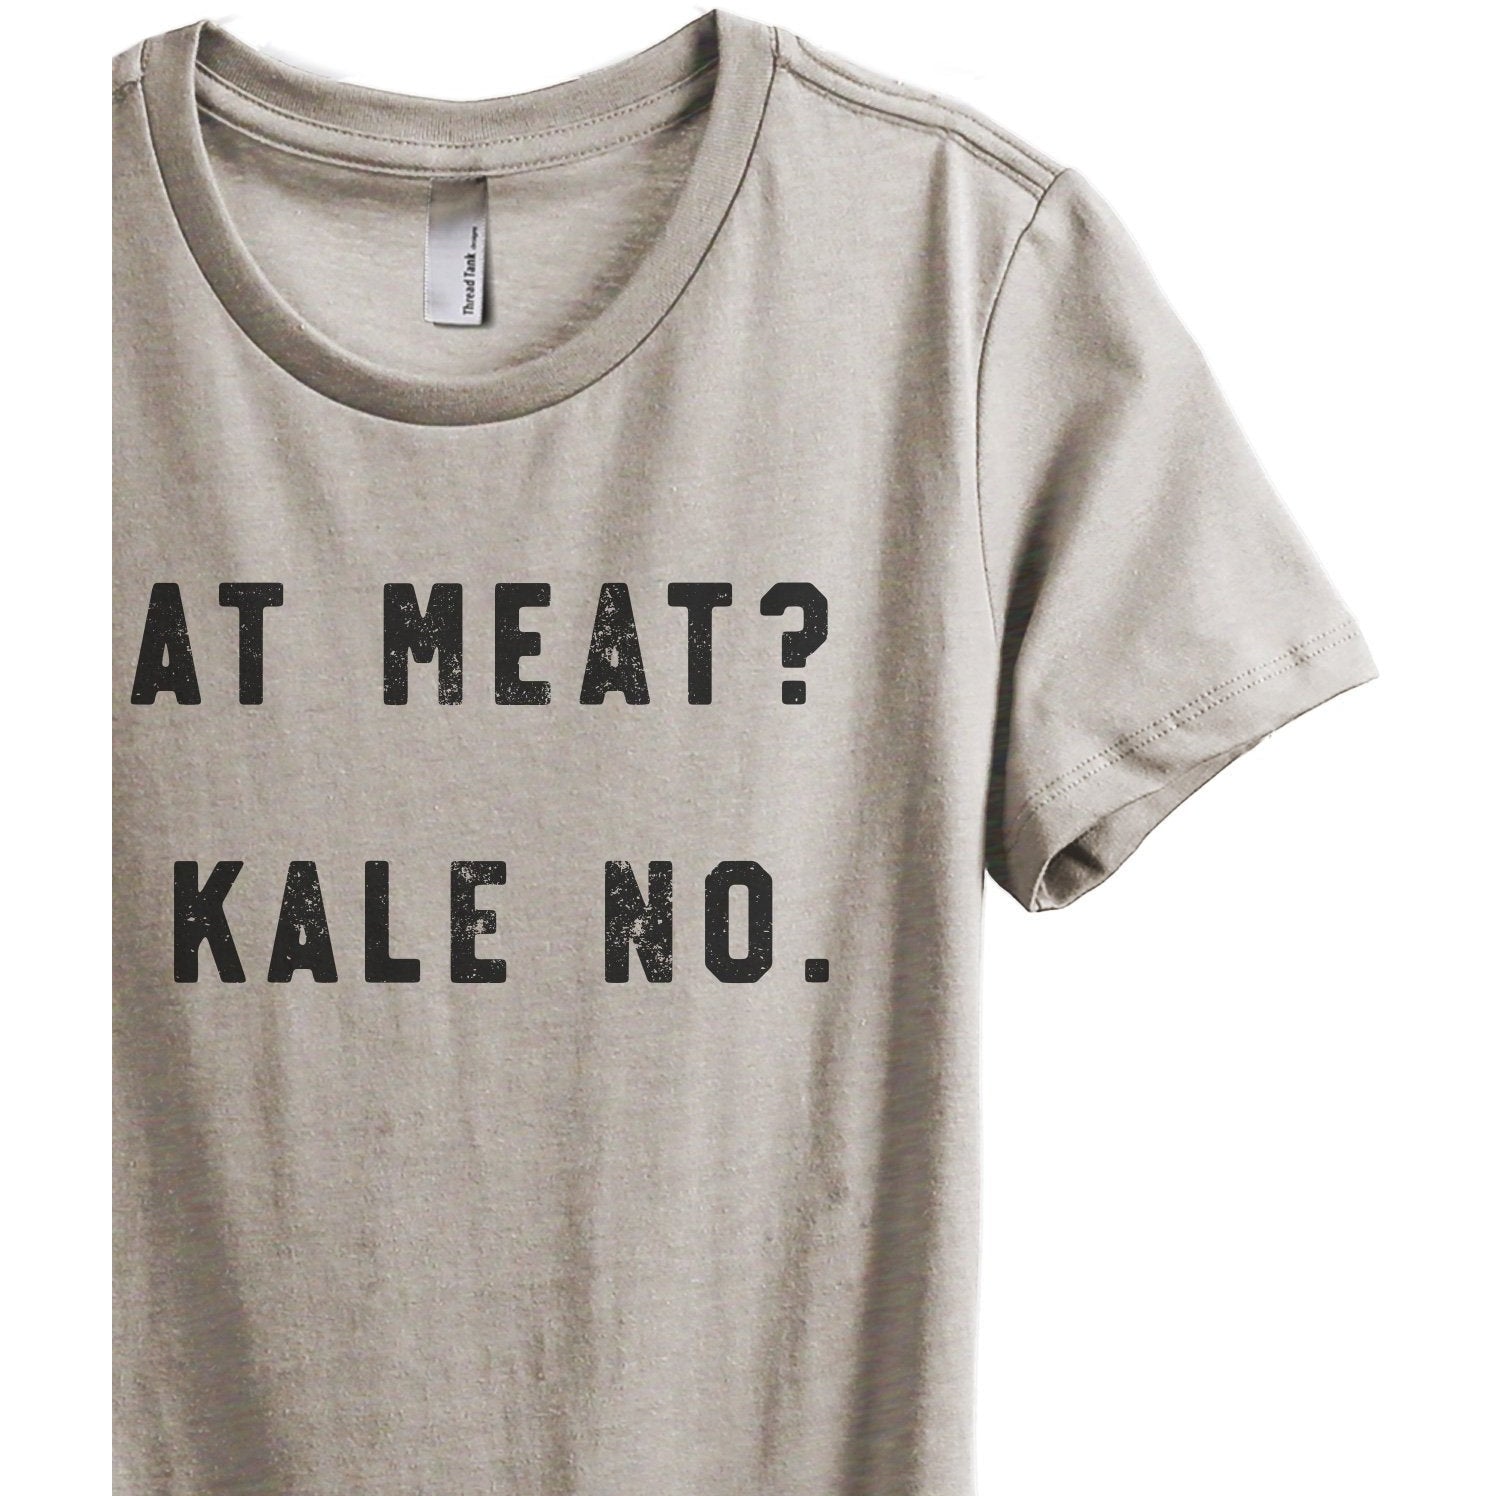 Eat Meat Kale No Women's Relaxed Crewneck T-Shirt Top Tee Heather Tan Zoom Details